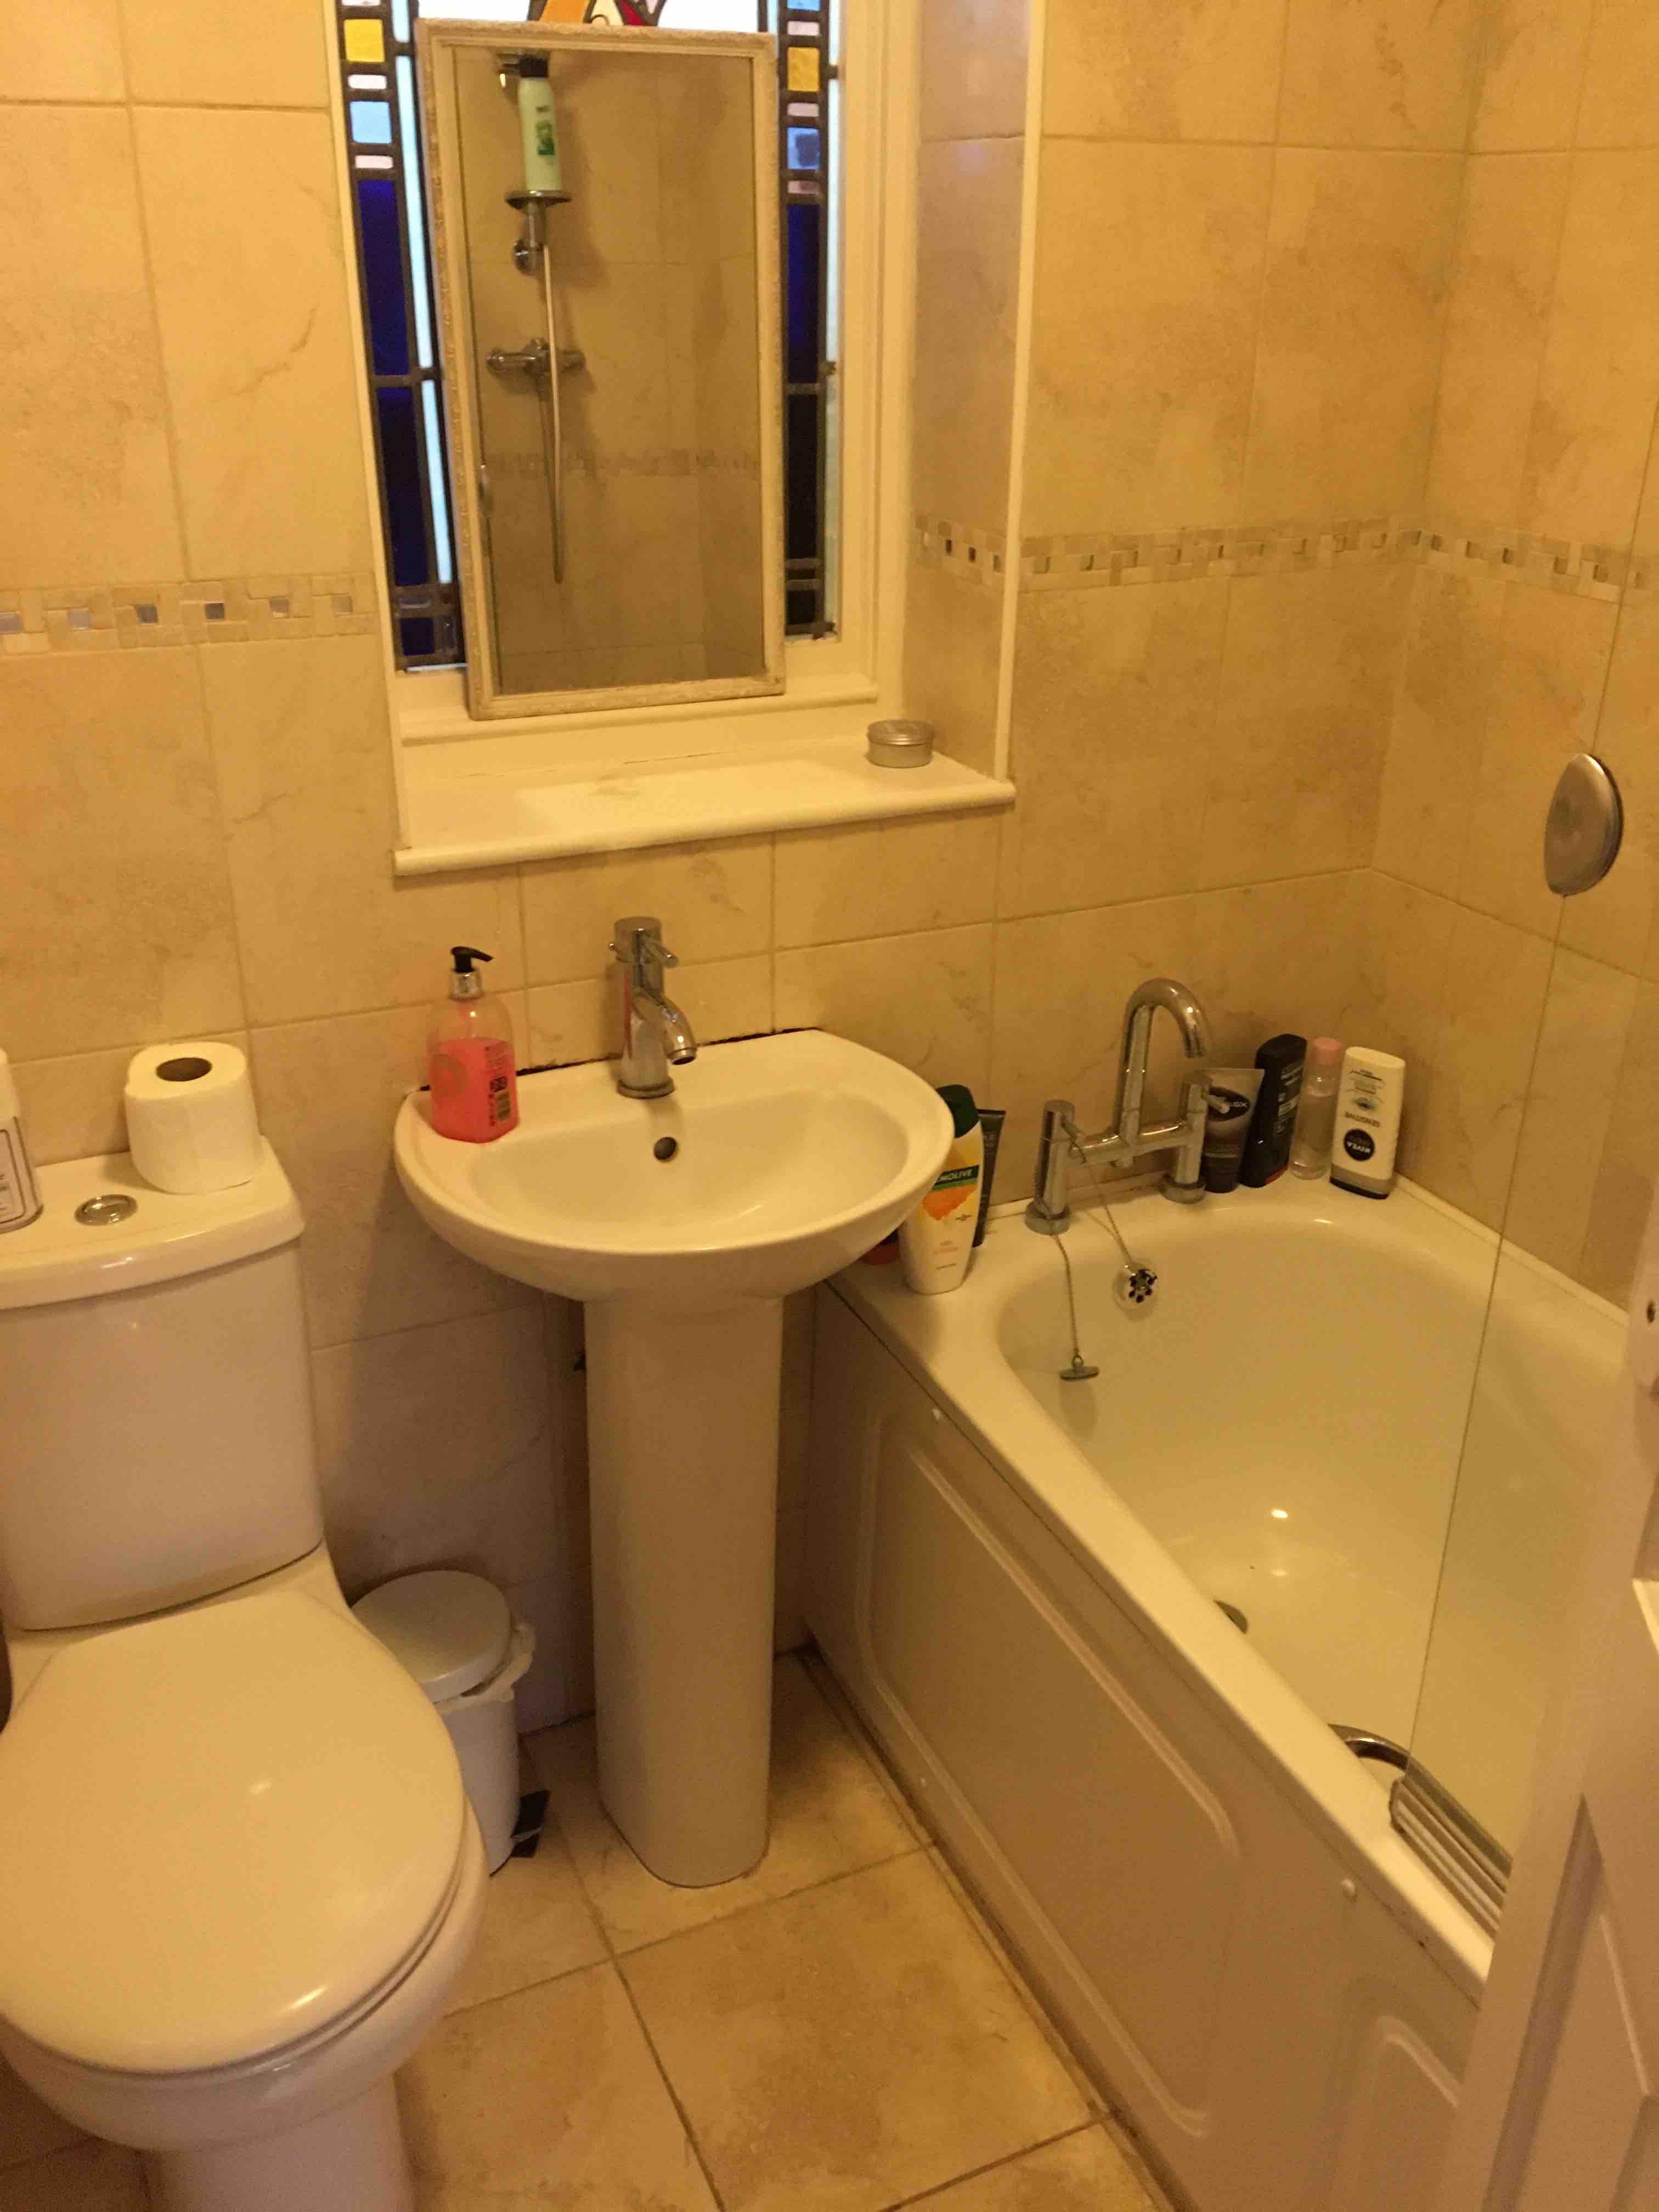 Nice Double room for single occupant, inc bills, RM8 2XT 10 min walk to District line Becontree RoomsLocal image